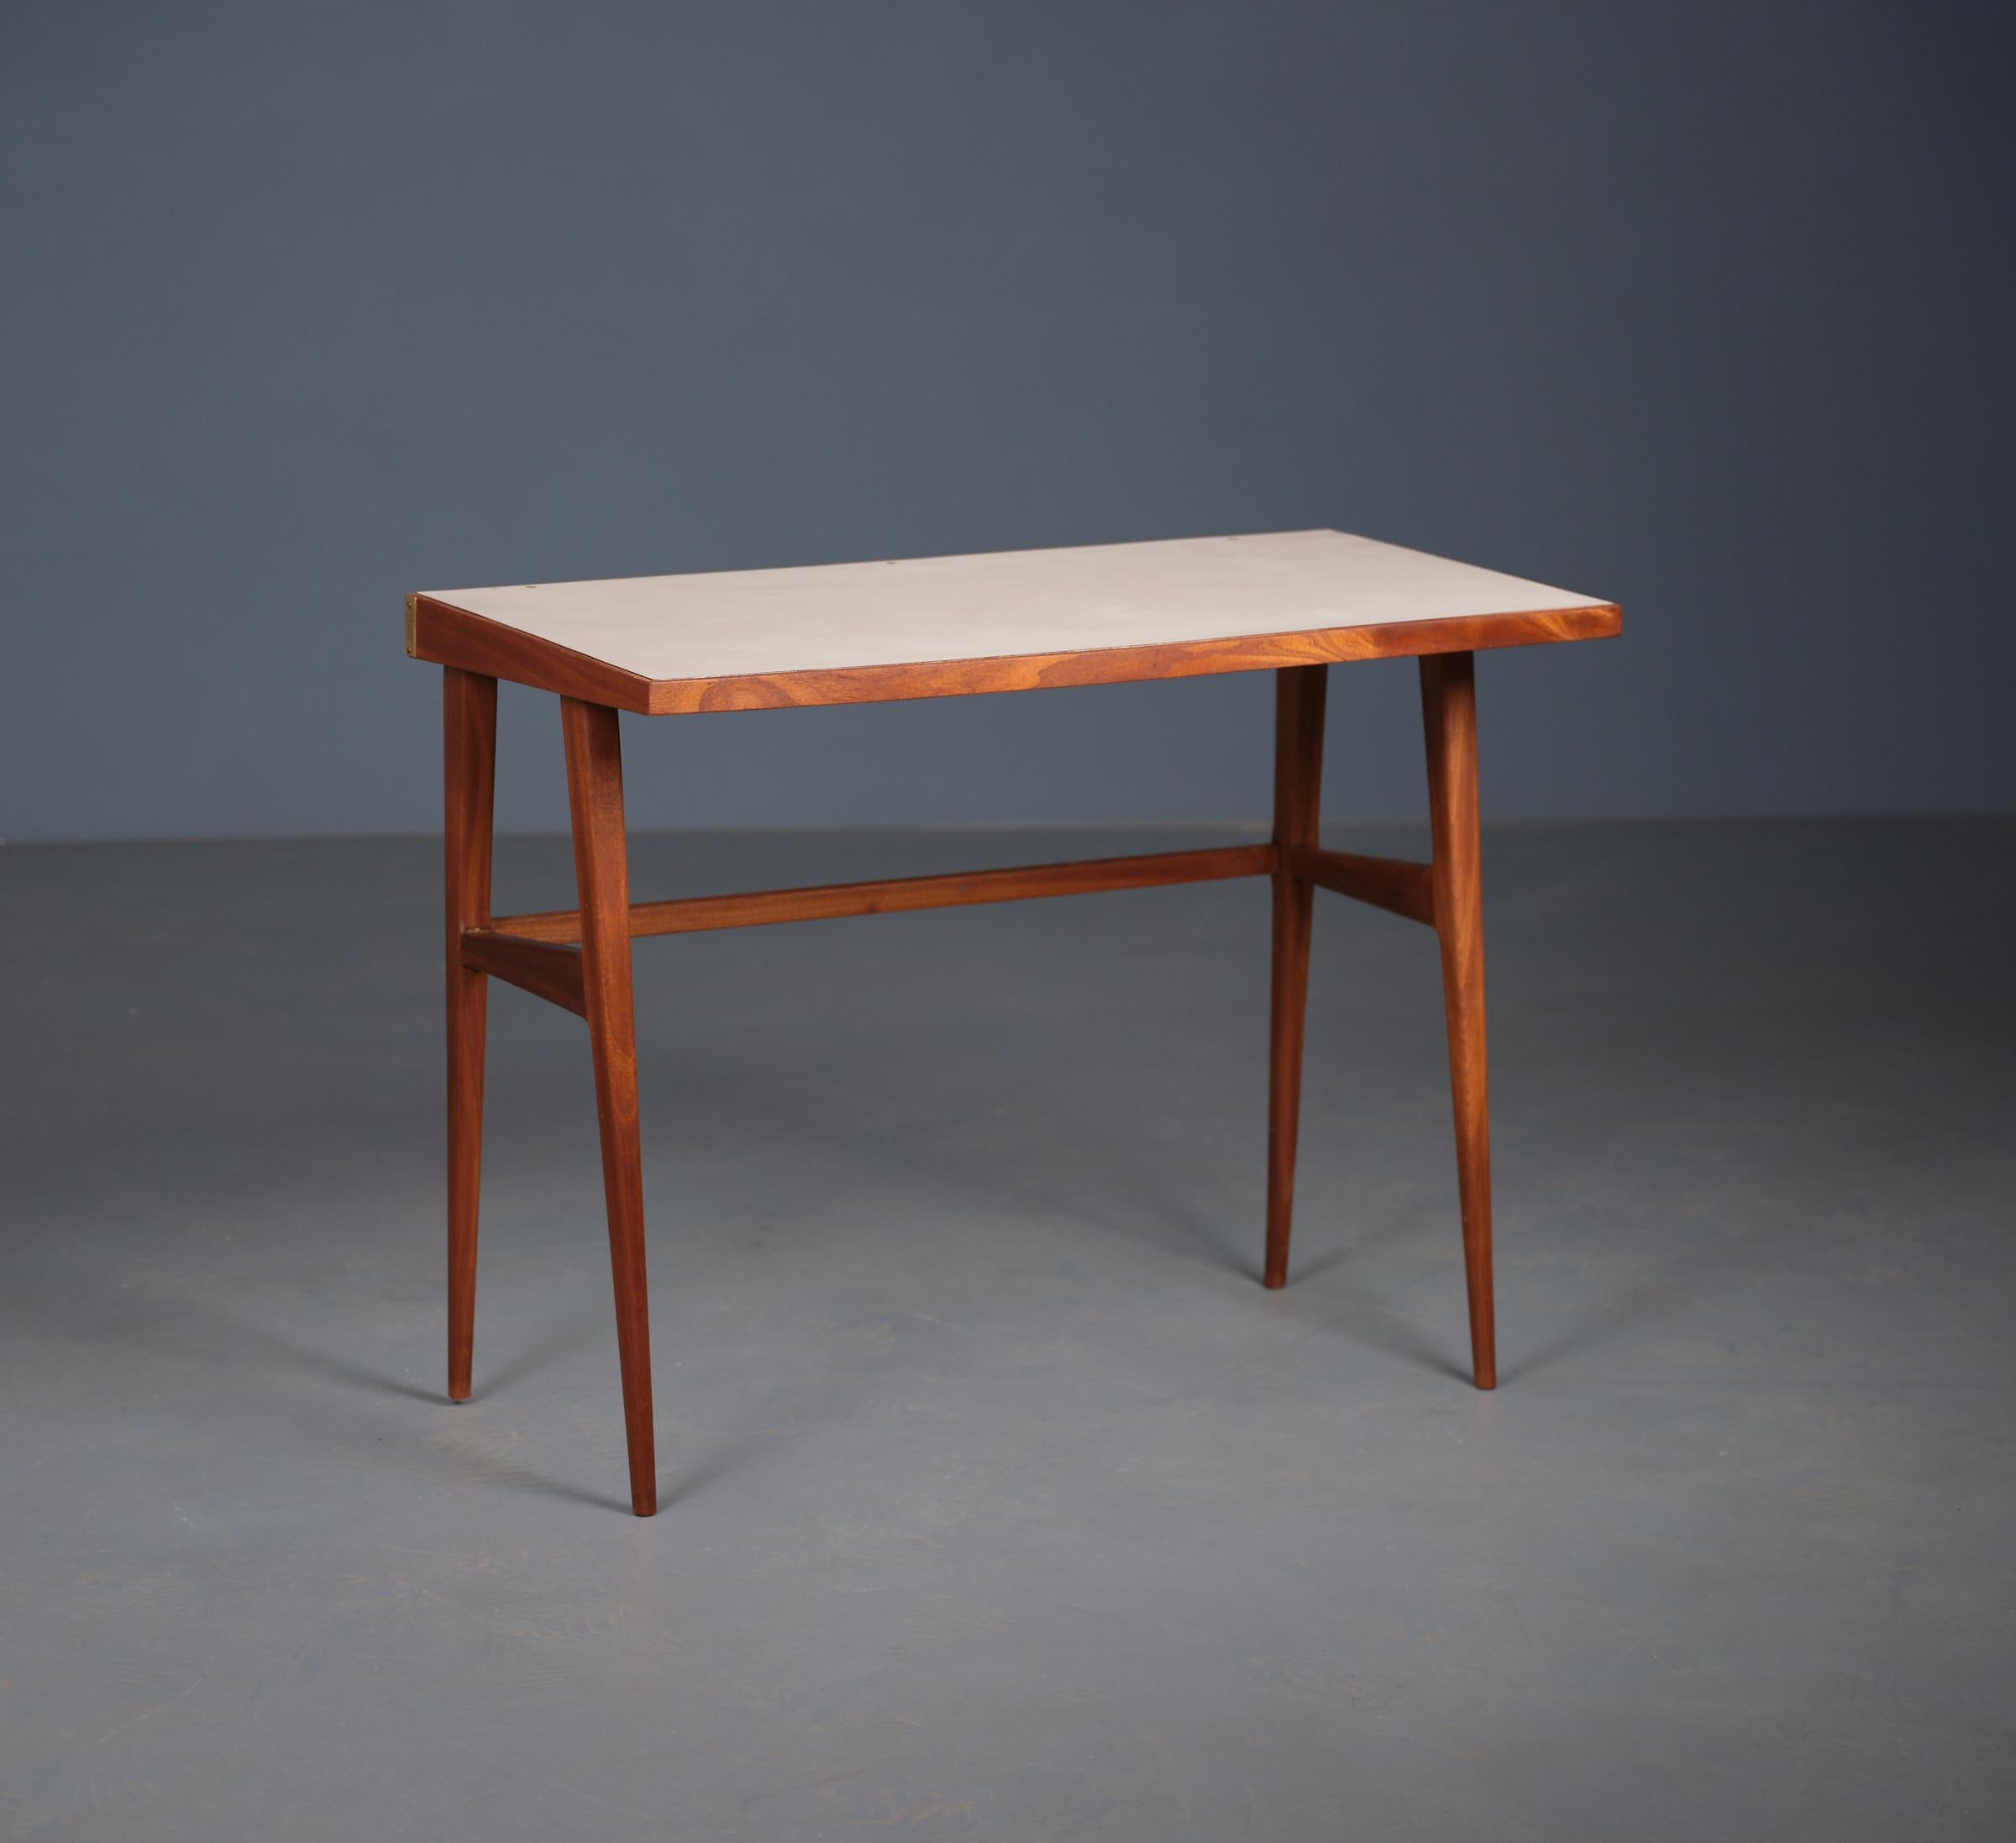 Discover the epitome of Italian craftsmanship with this stunning desk, meticulously designed and produced in the 1950s by F.lli Strada. This piece is a standout example of mid-century modern design, characterized by its sculptural lines and refined